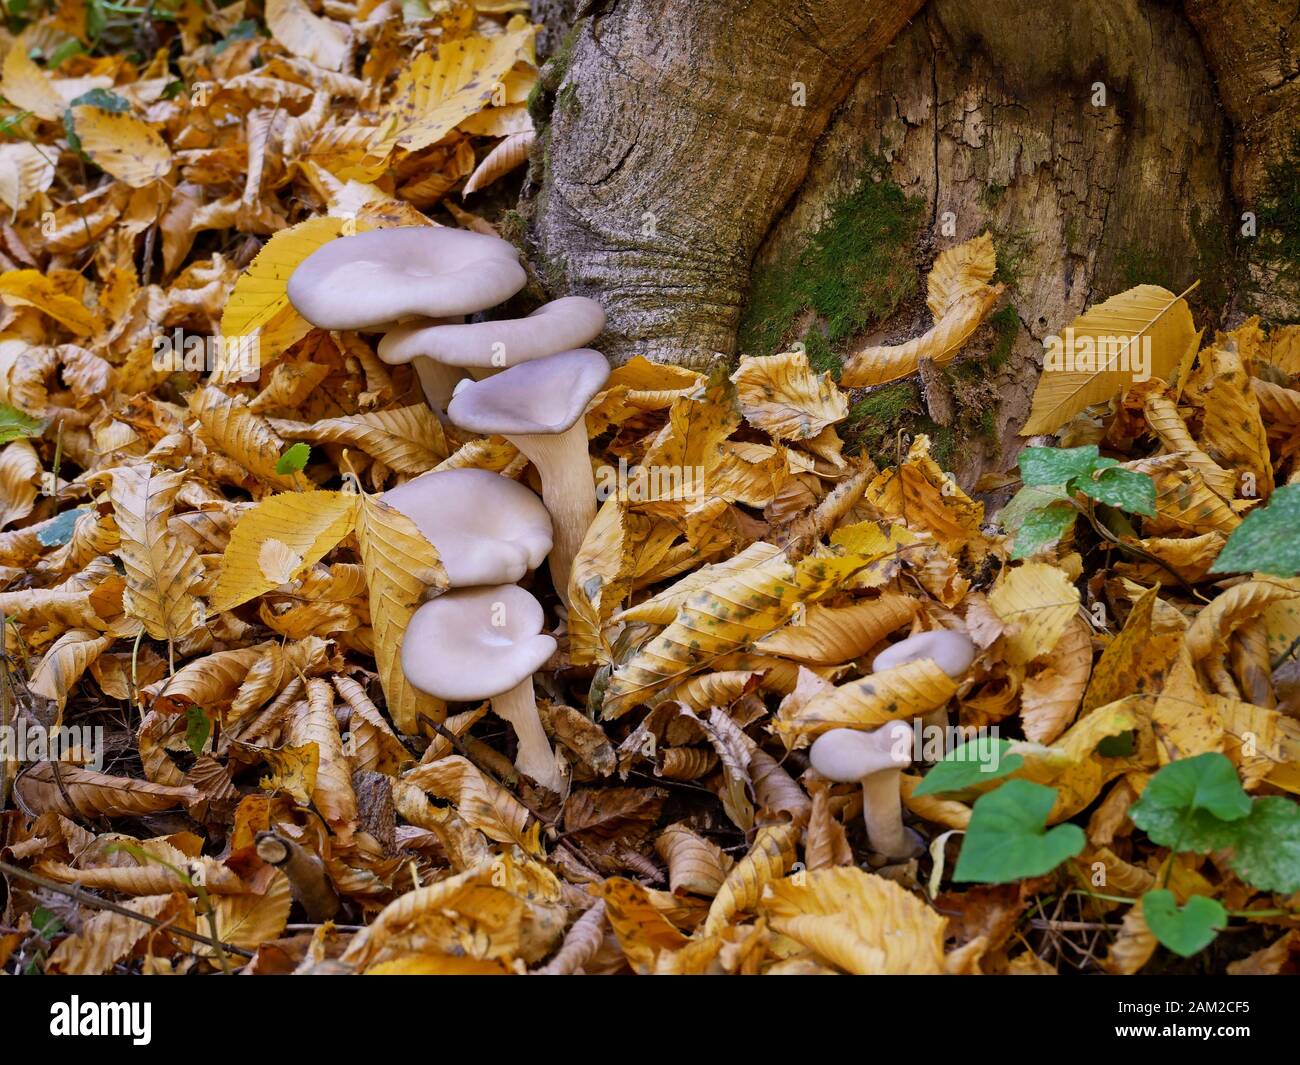 Oyster mushroom (Pleurotus ostreatus) growing near the stump, this variety is common in forests of Central and Western Ukraine Stock Photo